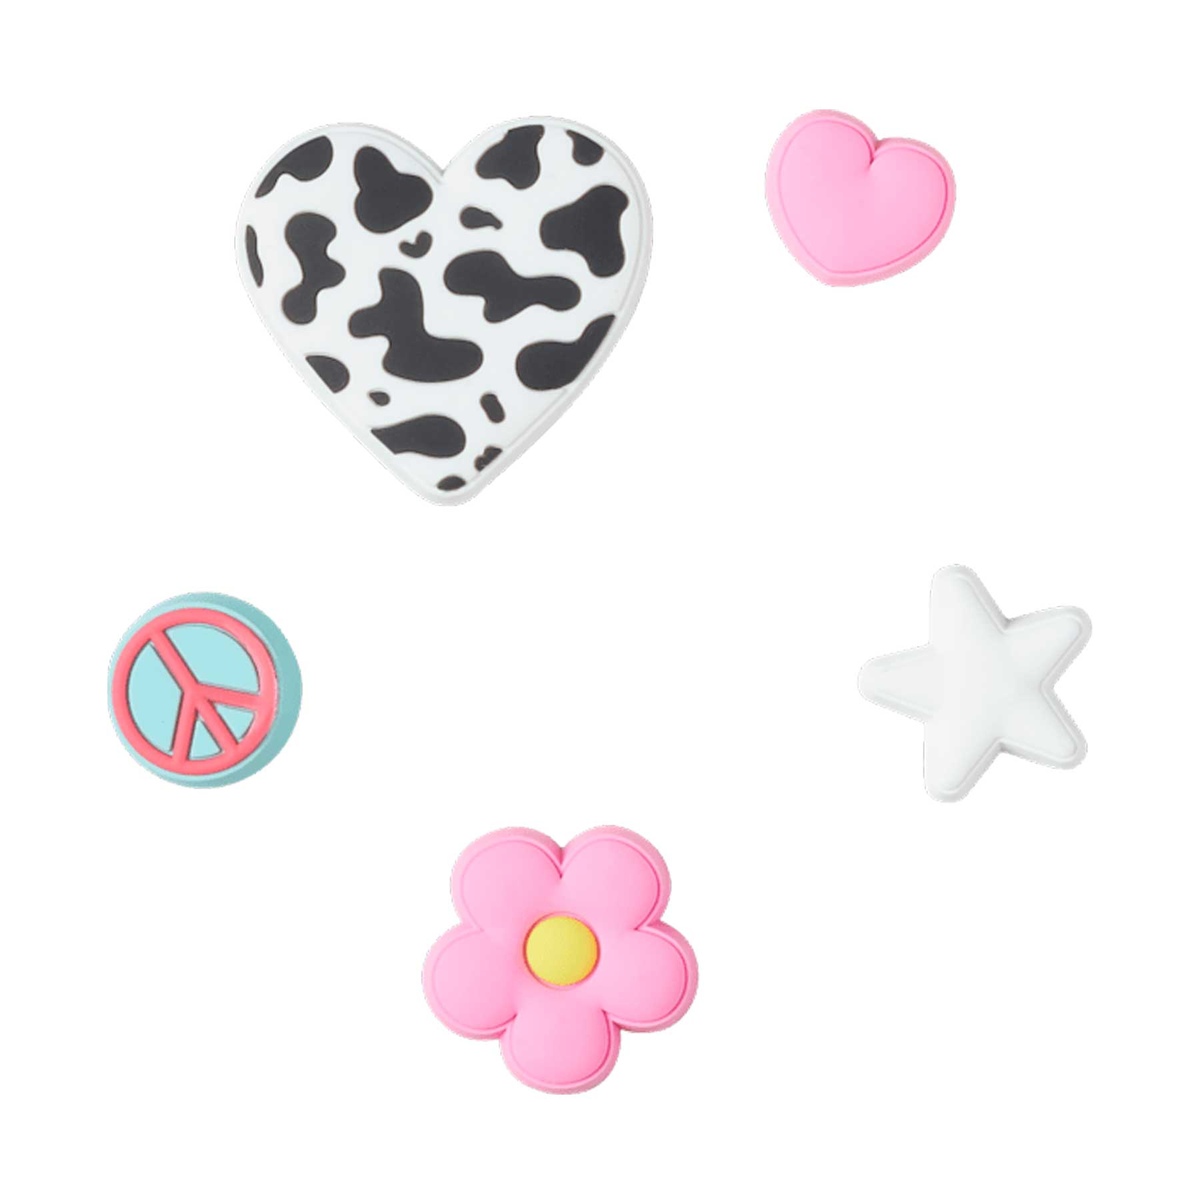 GIRLY ICON 5 PACK